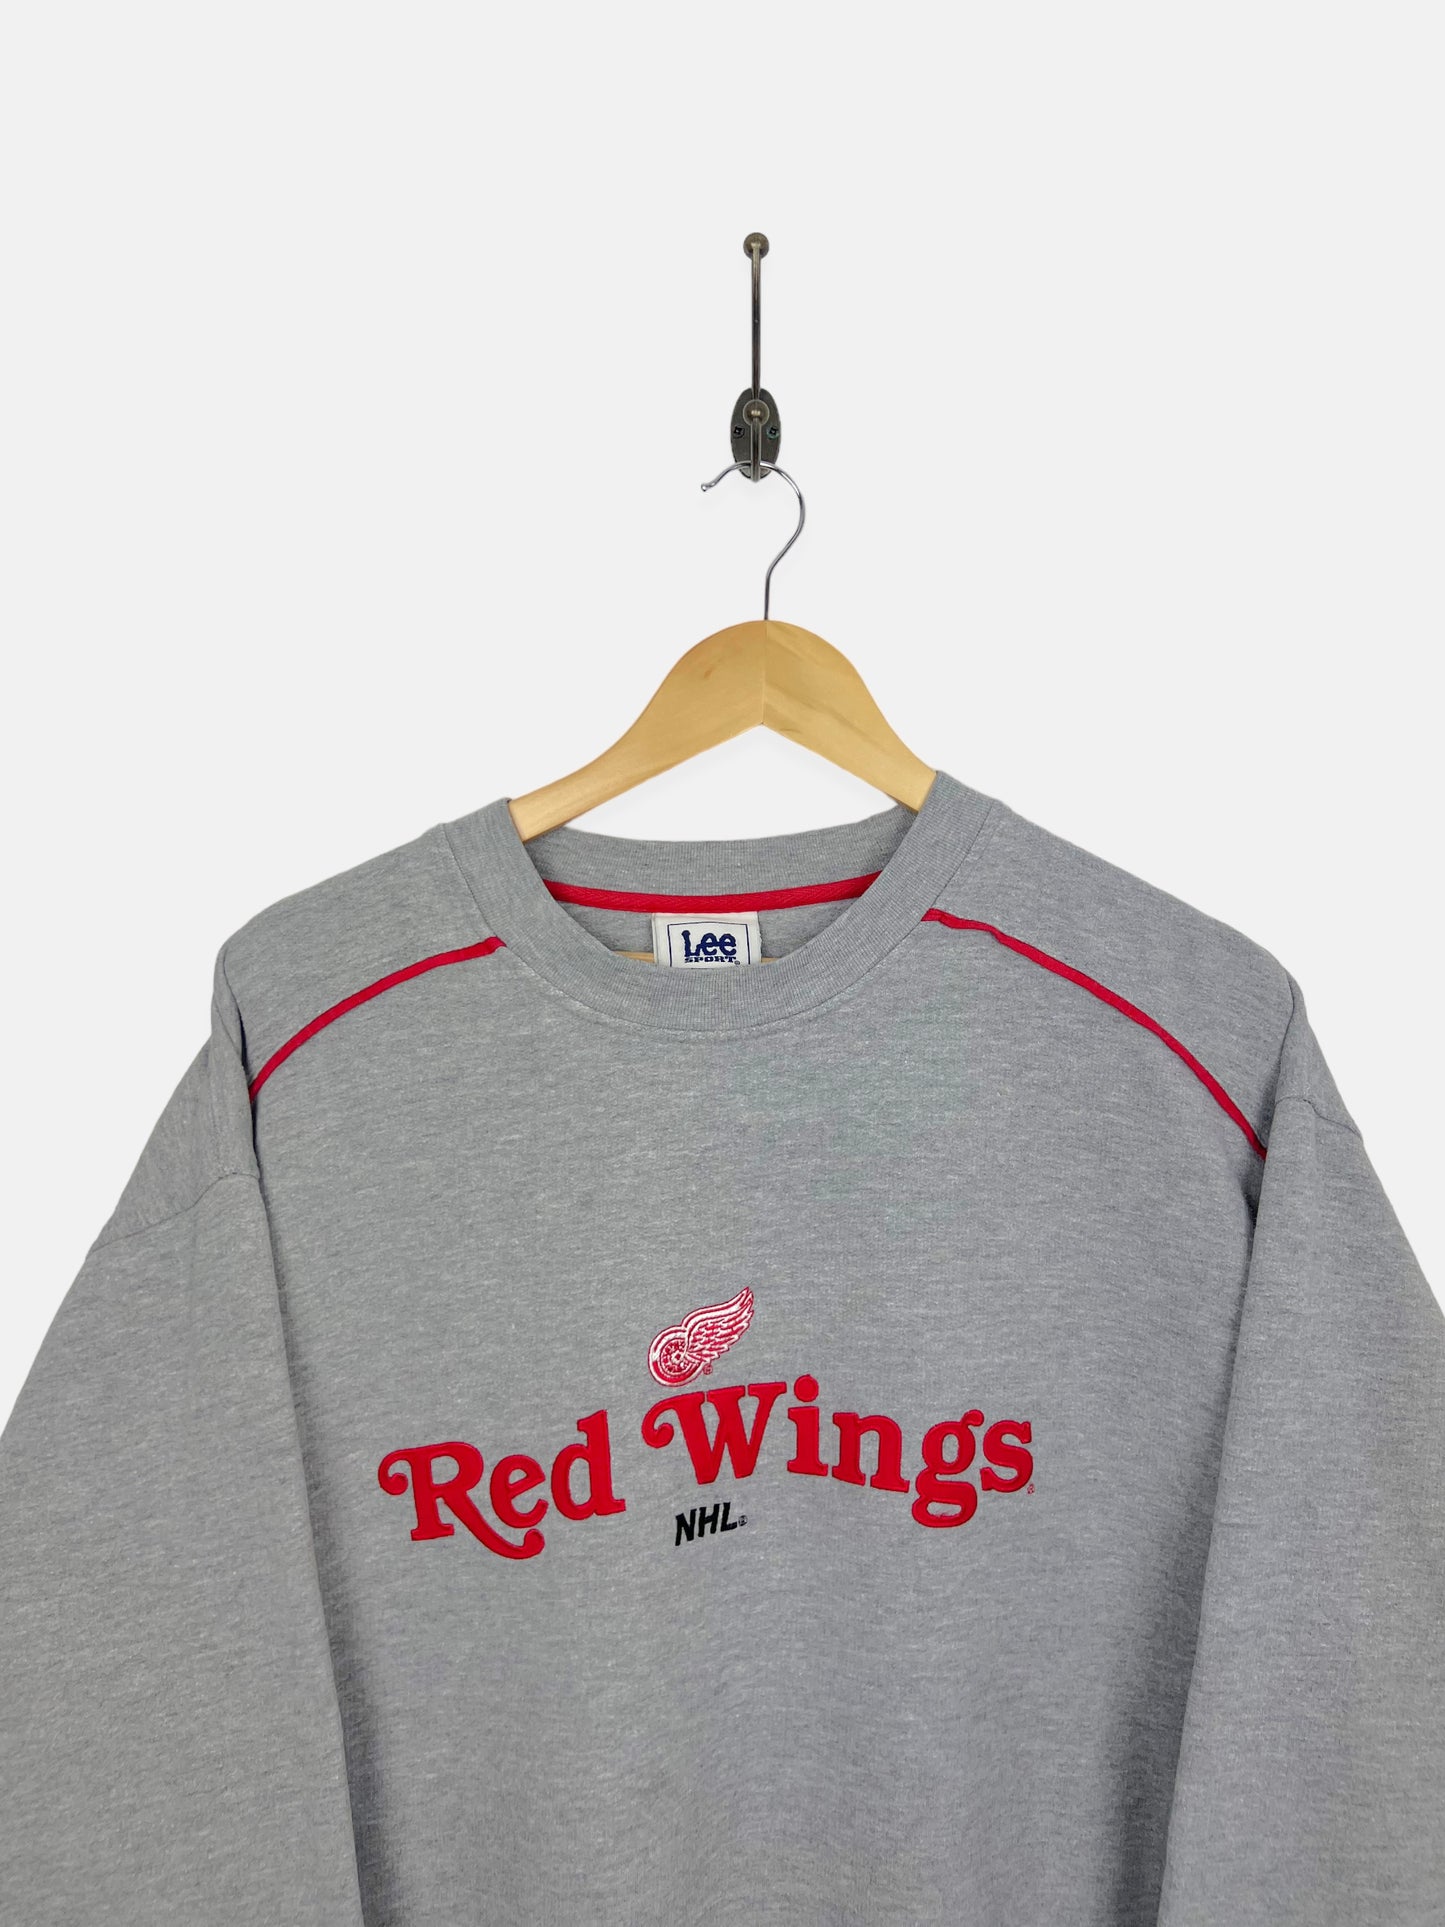 90's Detroit Red Wings NHL Embroidered Vintage Sweatshirt Size XL